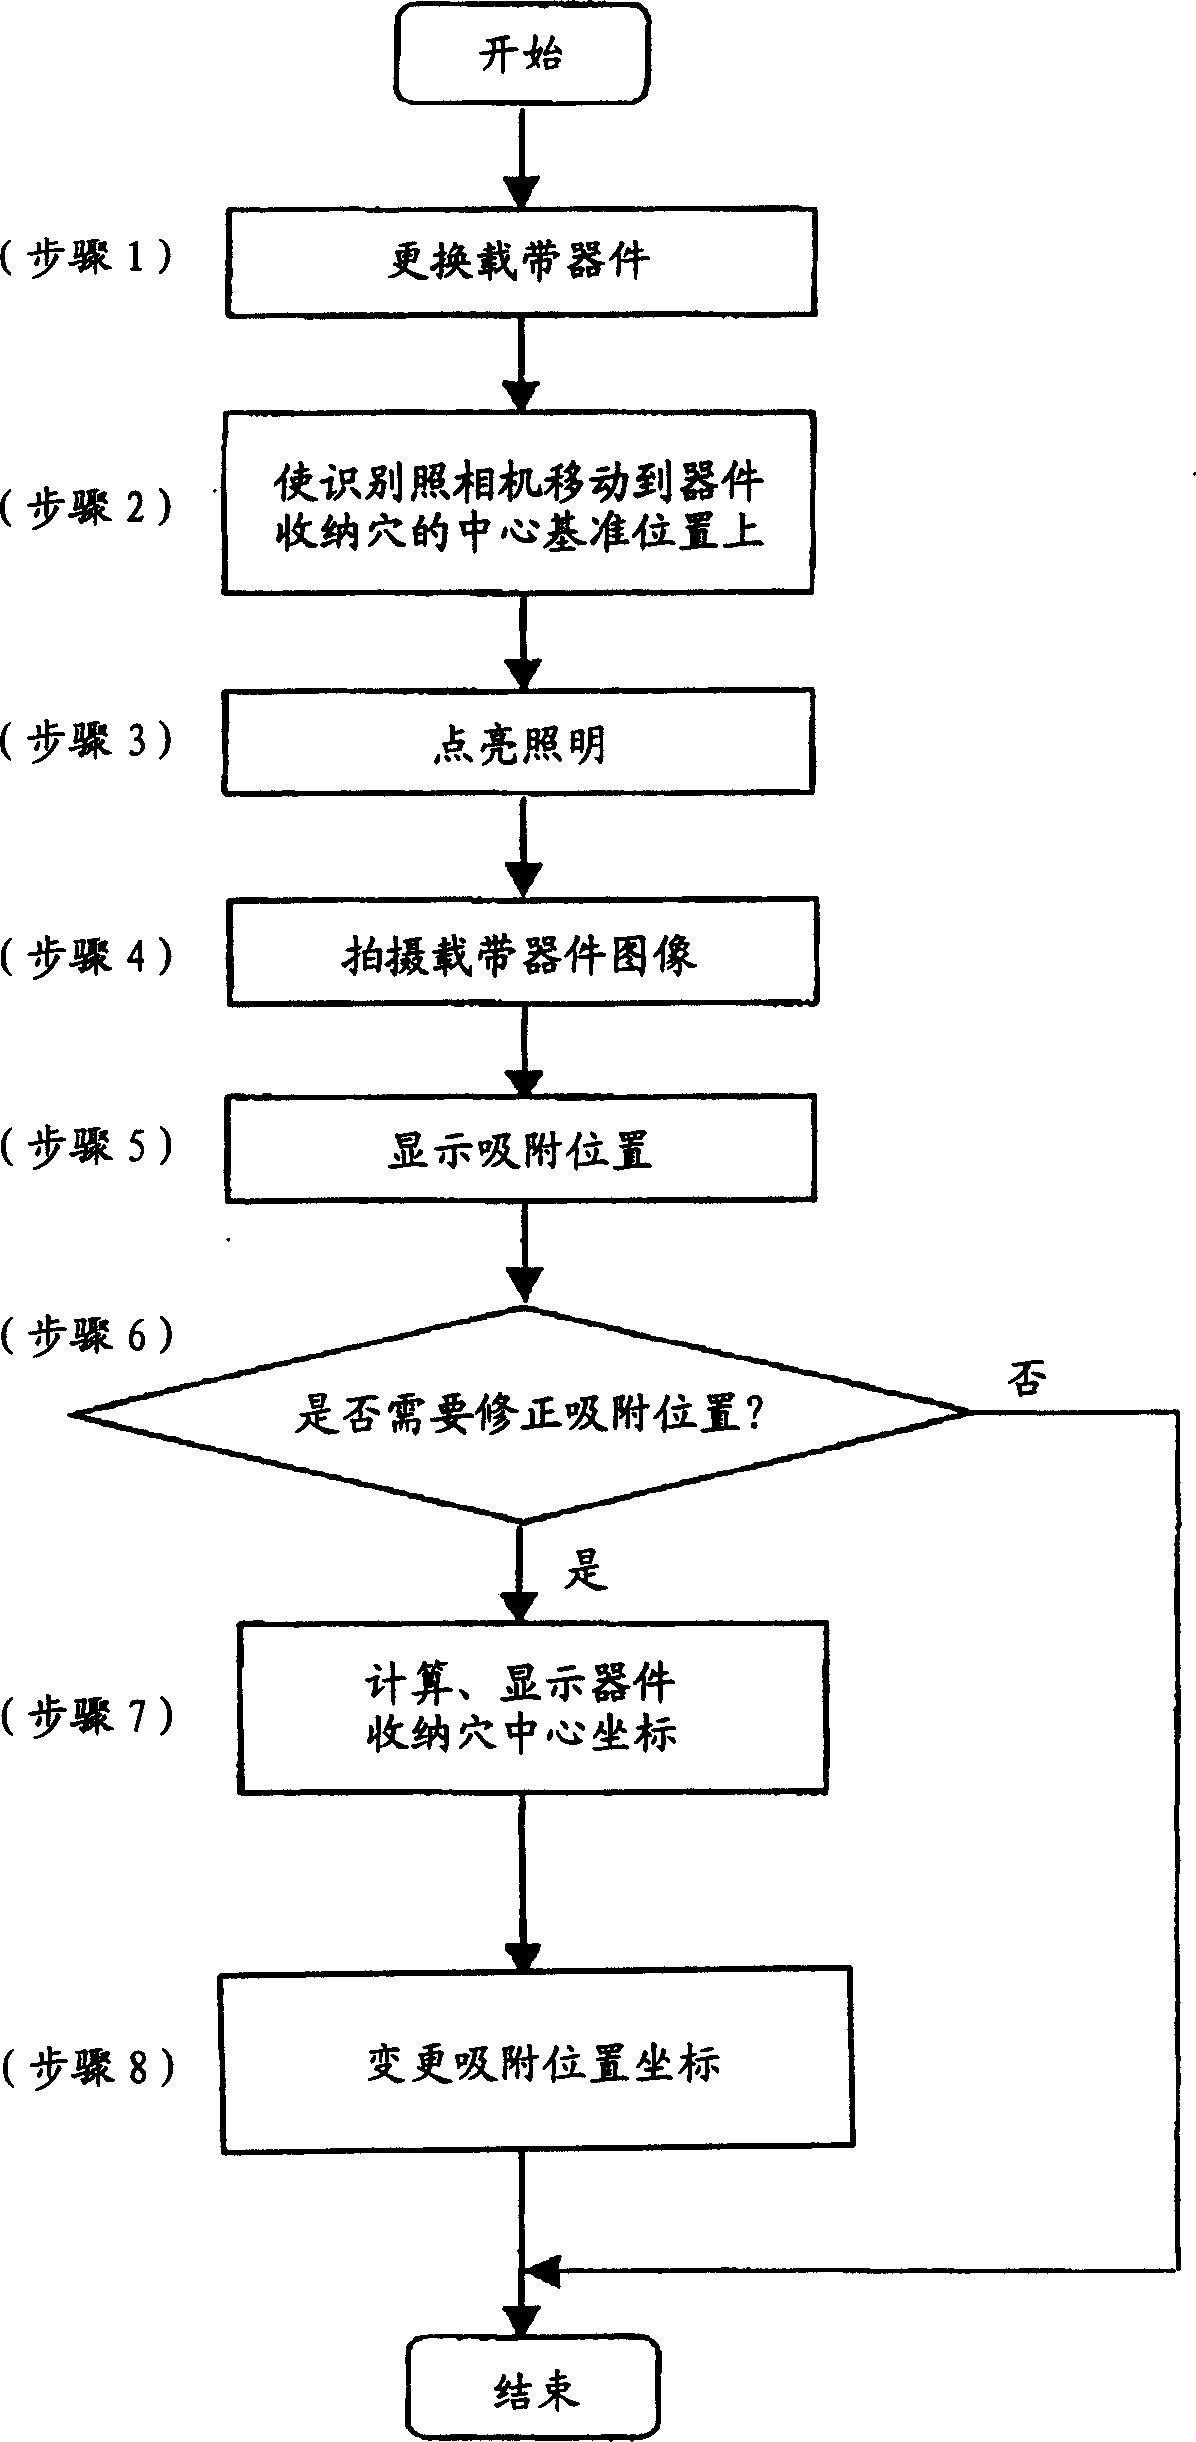 Adsorption position corrector of electronic device in electronic device mounting machine